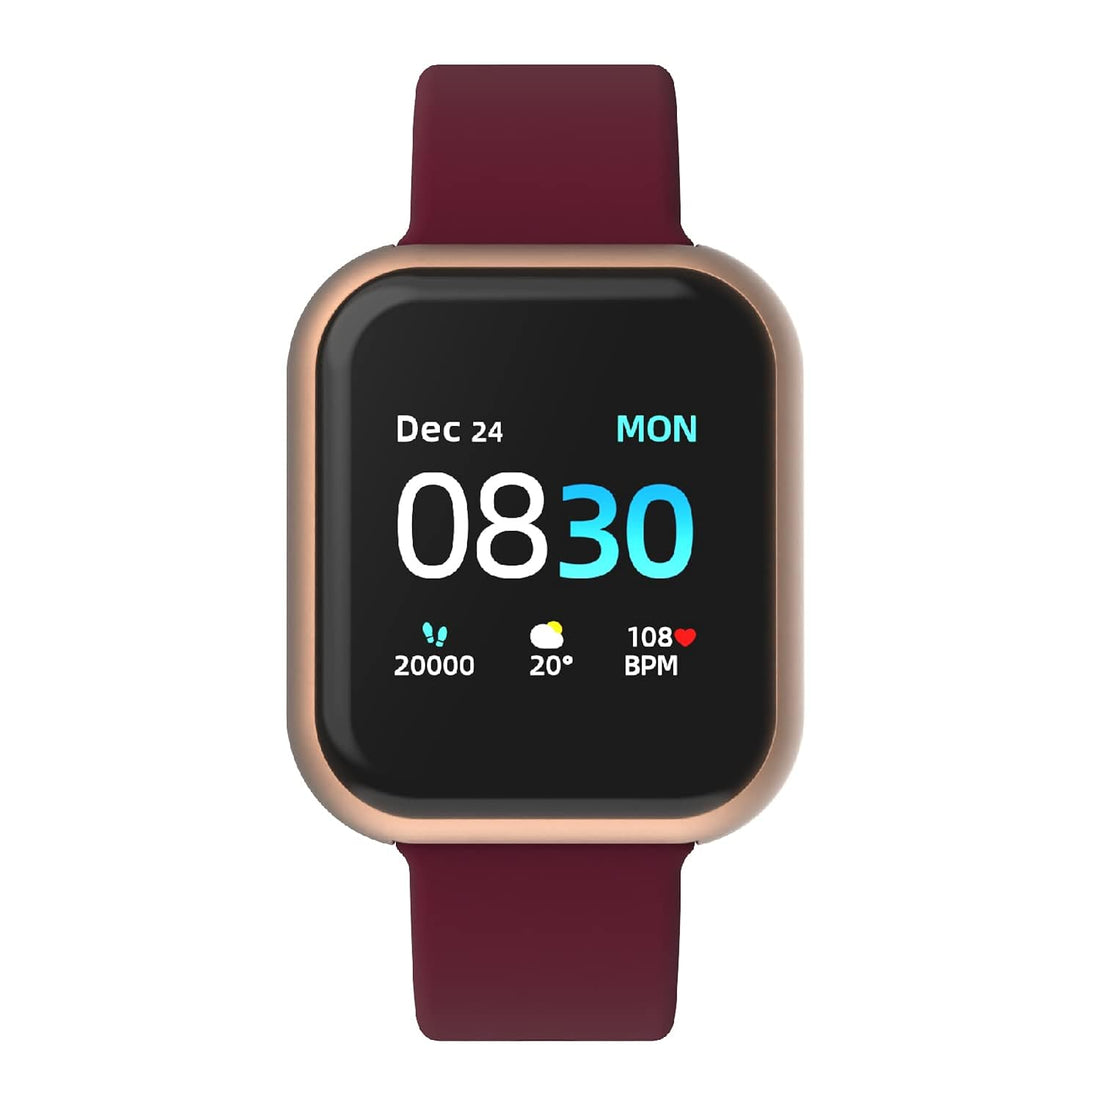 iTouch Air 3 Smartwatch for Fitness, iPhone and Android Compatible, Pedometer, Walking and Running Tracker for Women and Men (Merlot/Rose Gold)